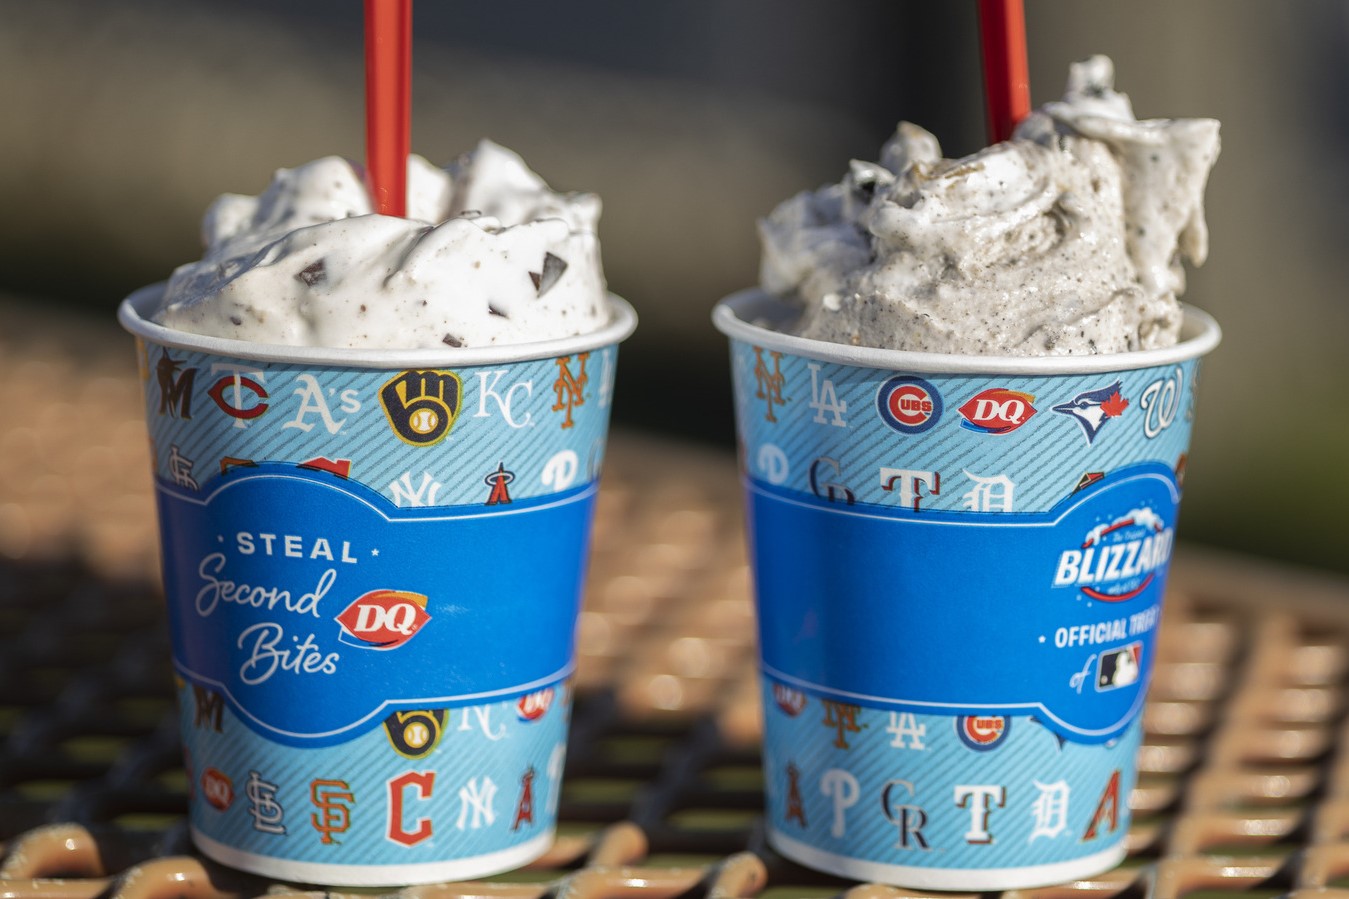 Unleash Your Taste Buds With The Ultimate Puppy Chow Blizzard!